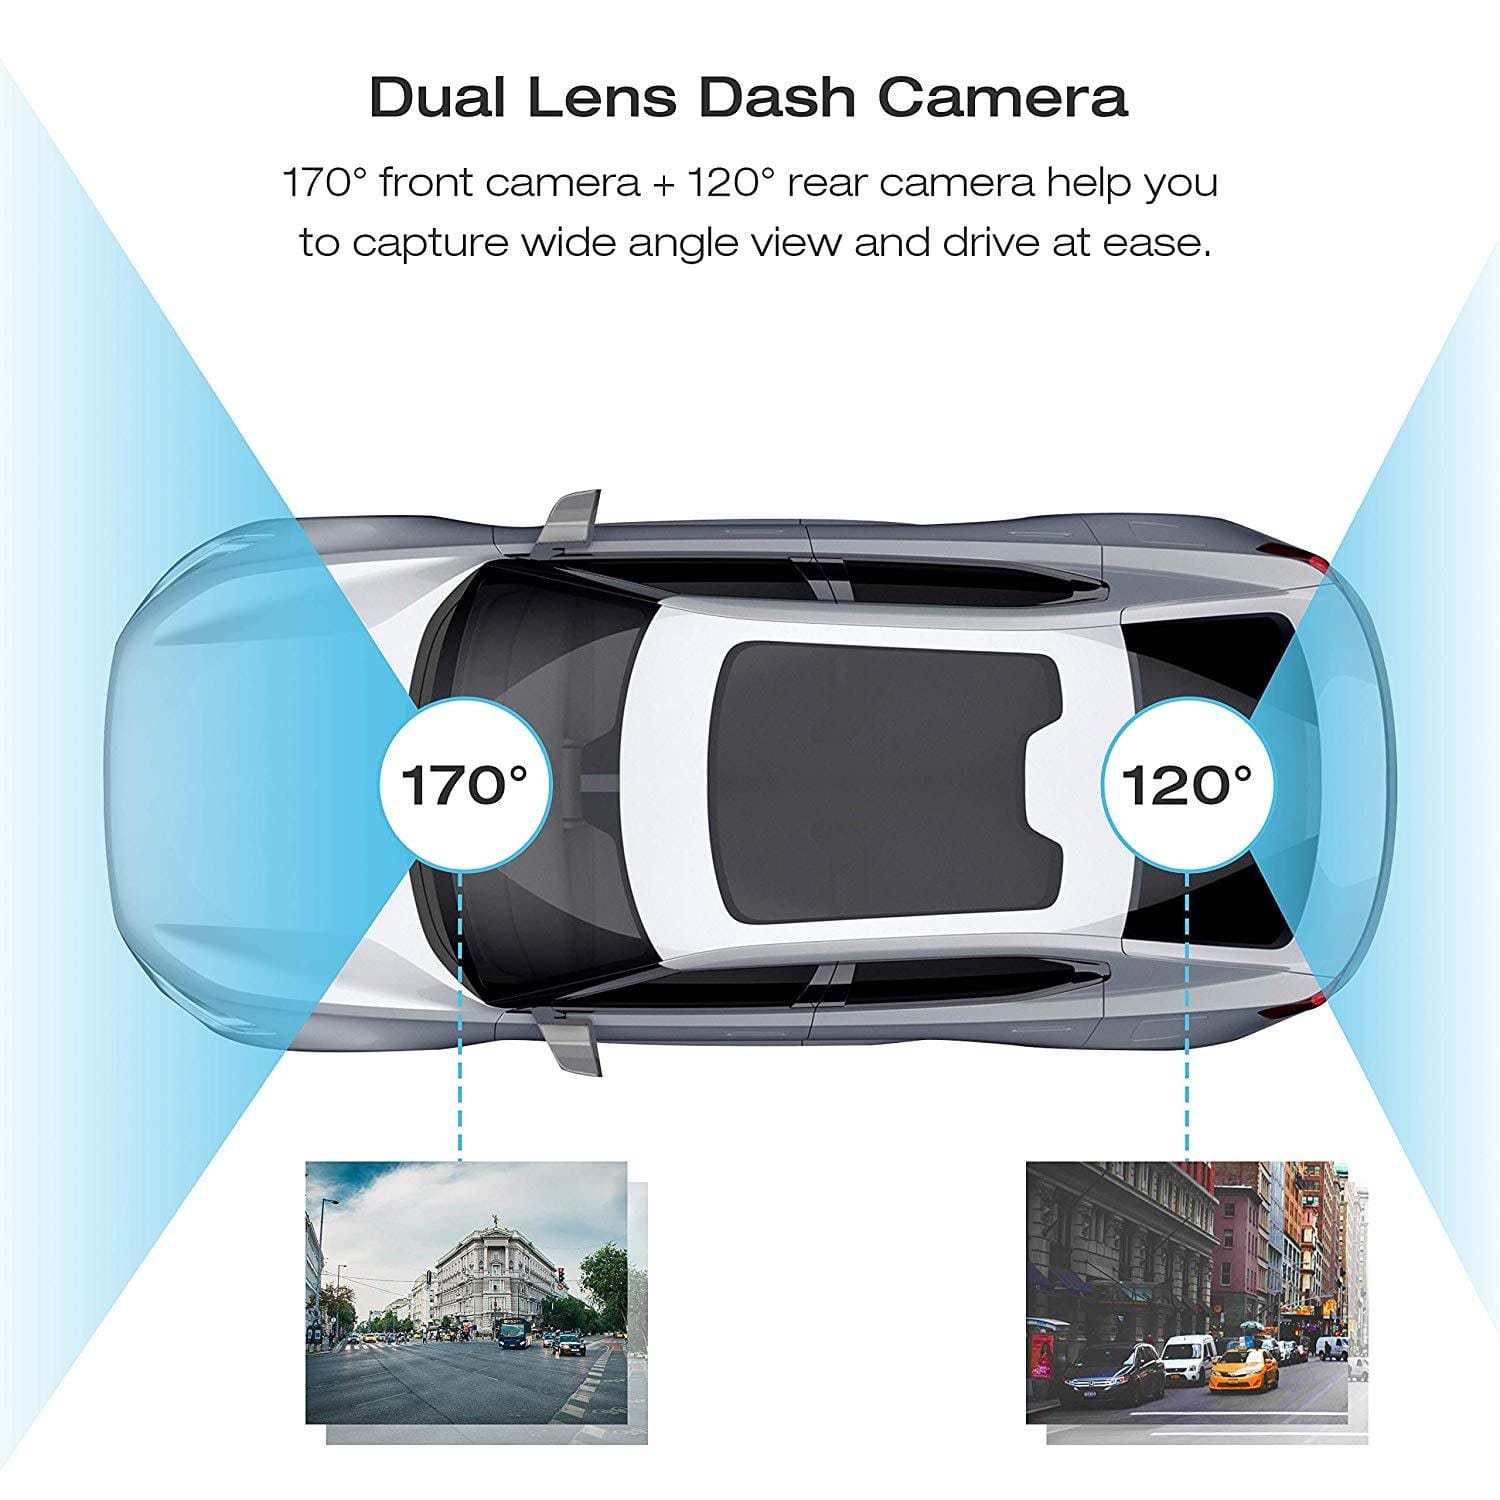 Campark R5 Video Streraming Rearview Mirror Dual 1080P Touch Screen Dash Cam and Backup Camera